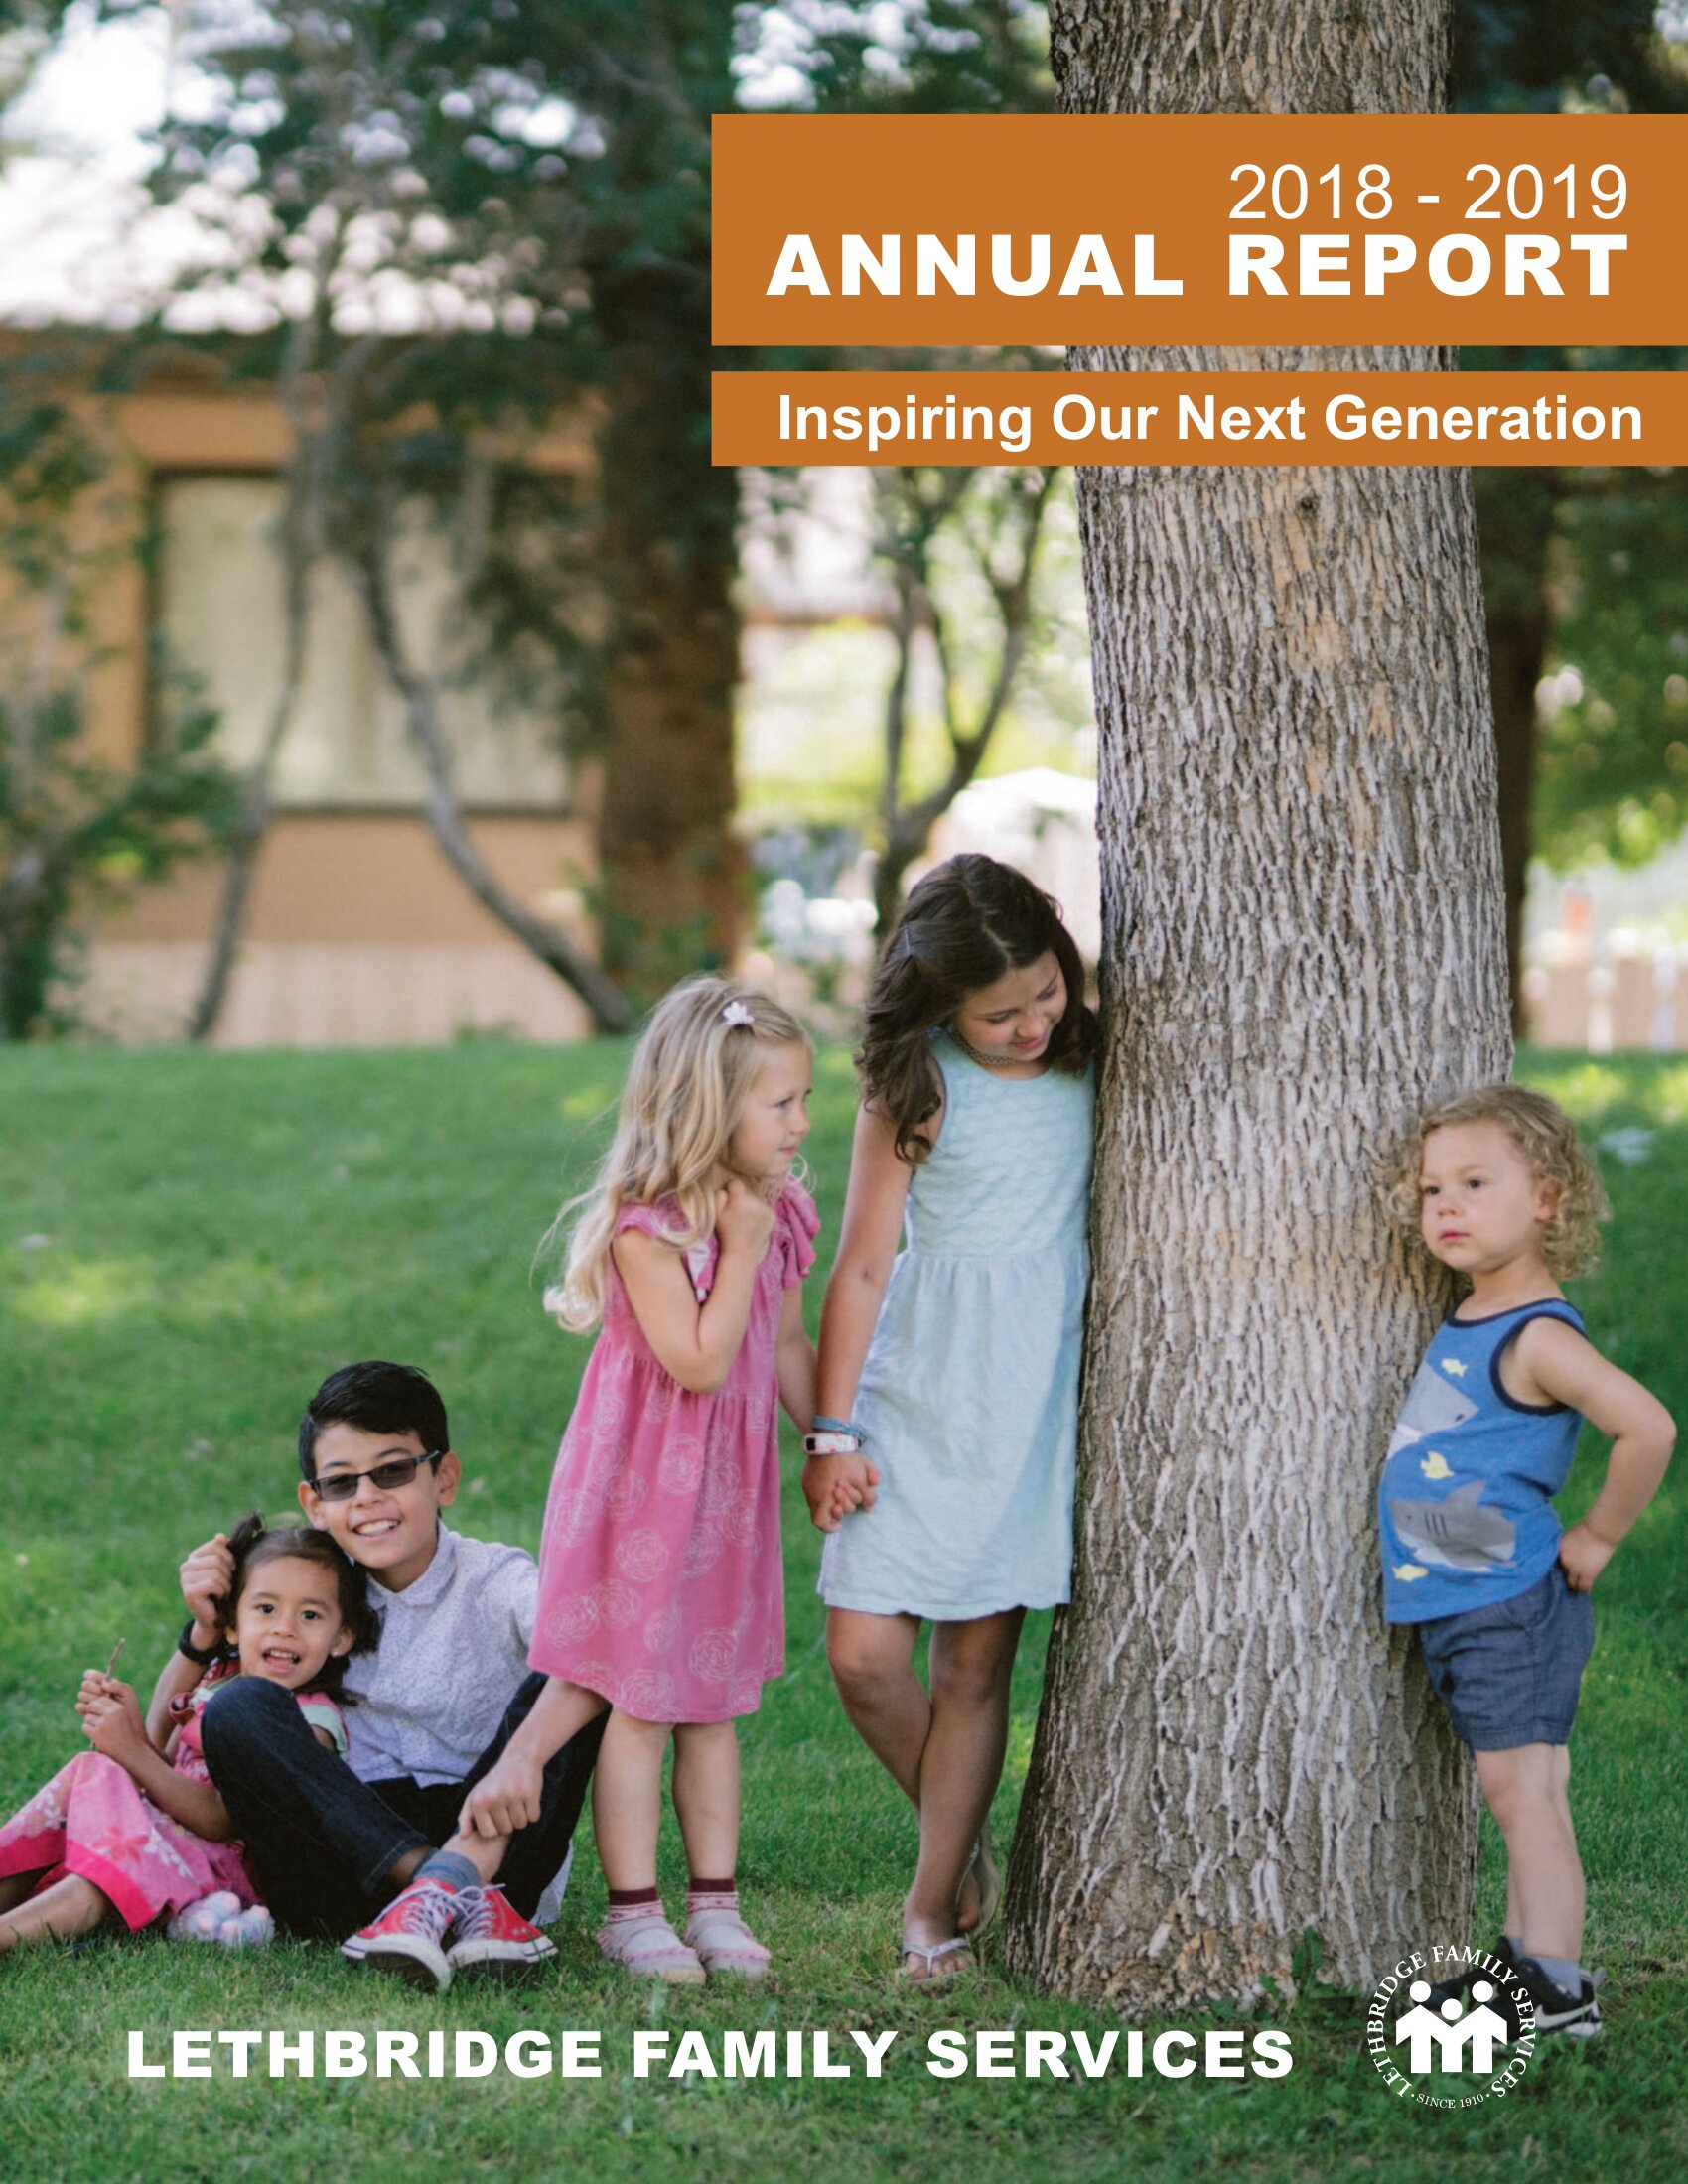 Lethbridge Family Services Annual Report 2018-2019